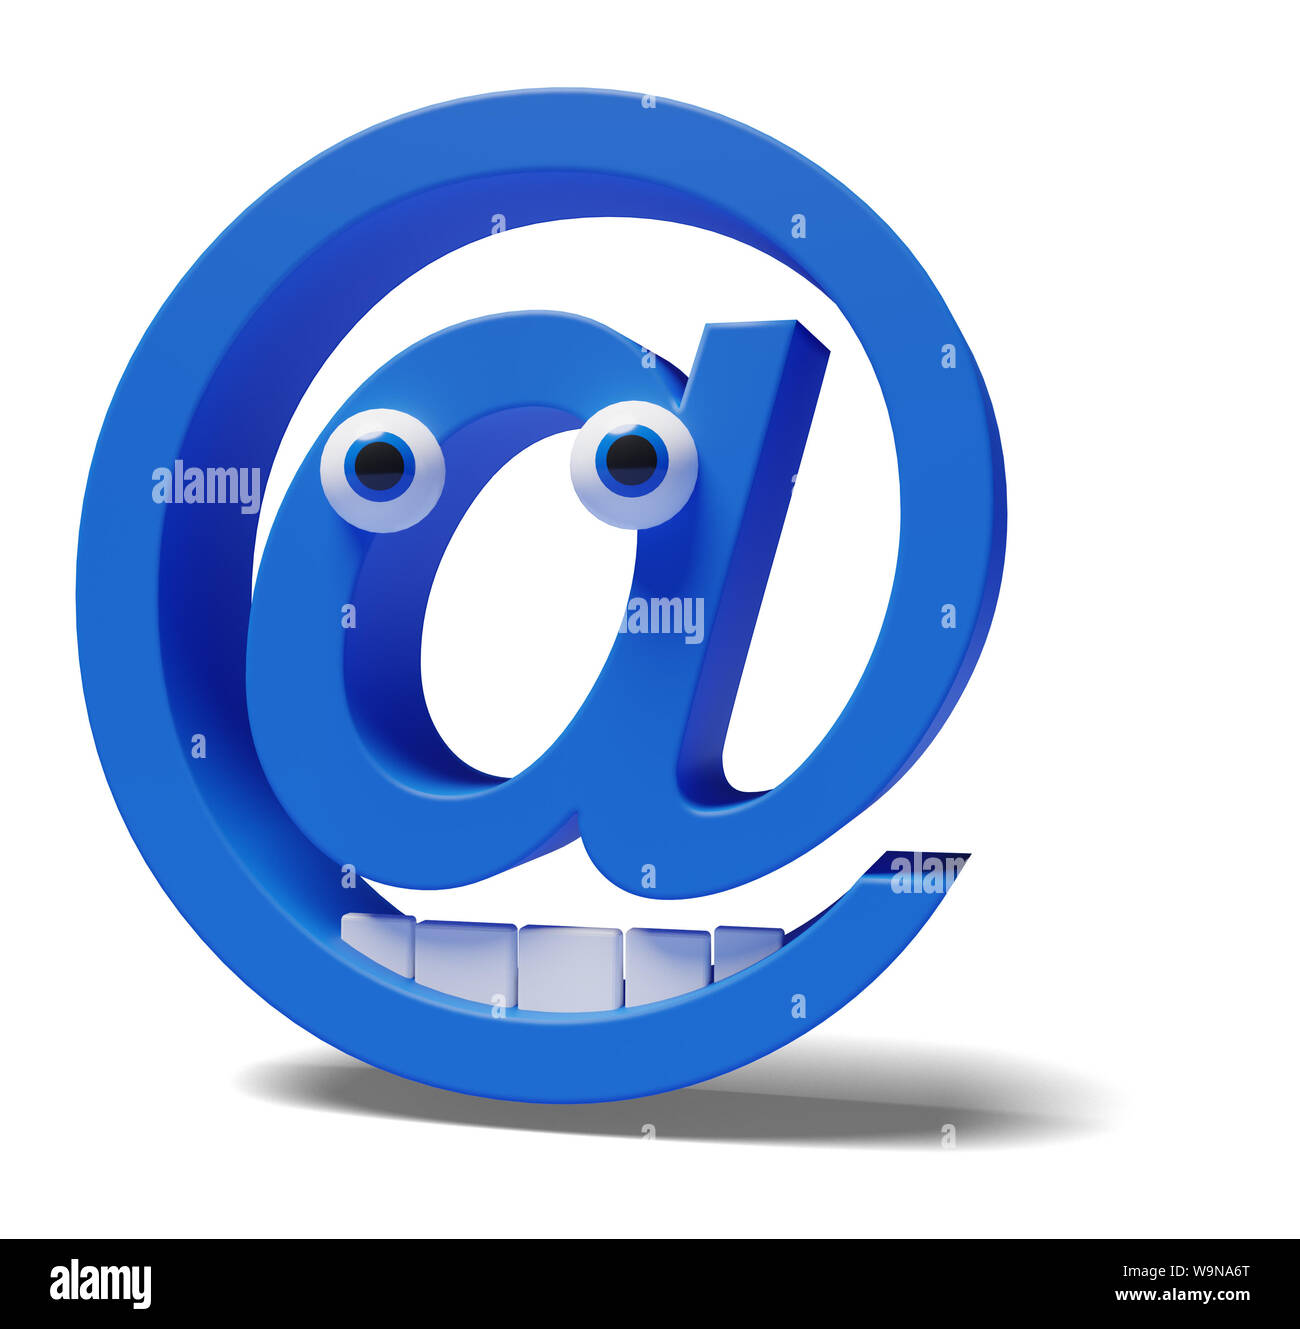 Funny 3D figure At - symbol @ character. For mail or contact. With eyes and teeth smiling. Stock Photo